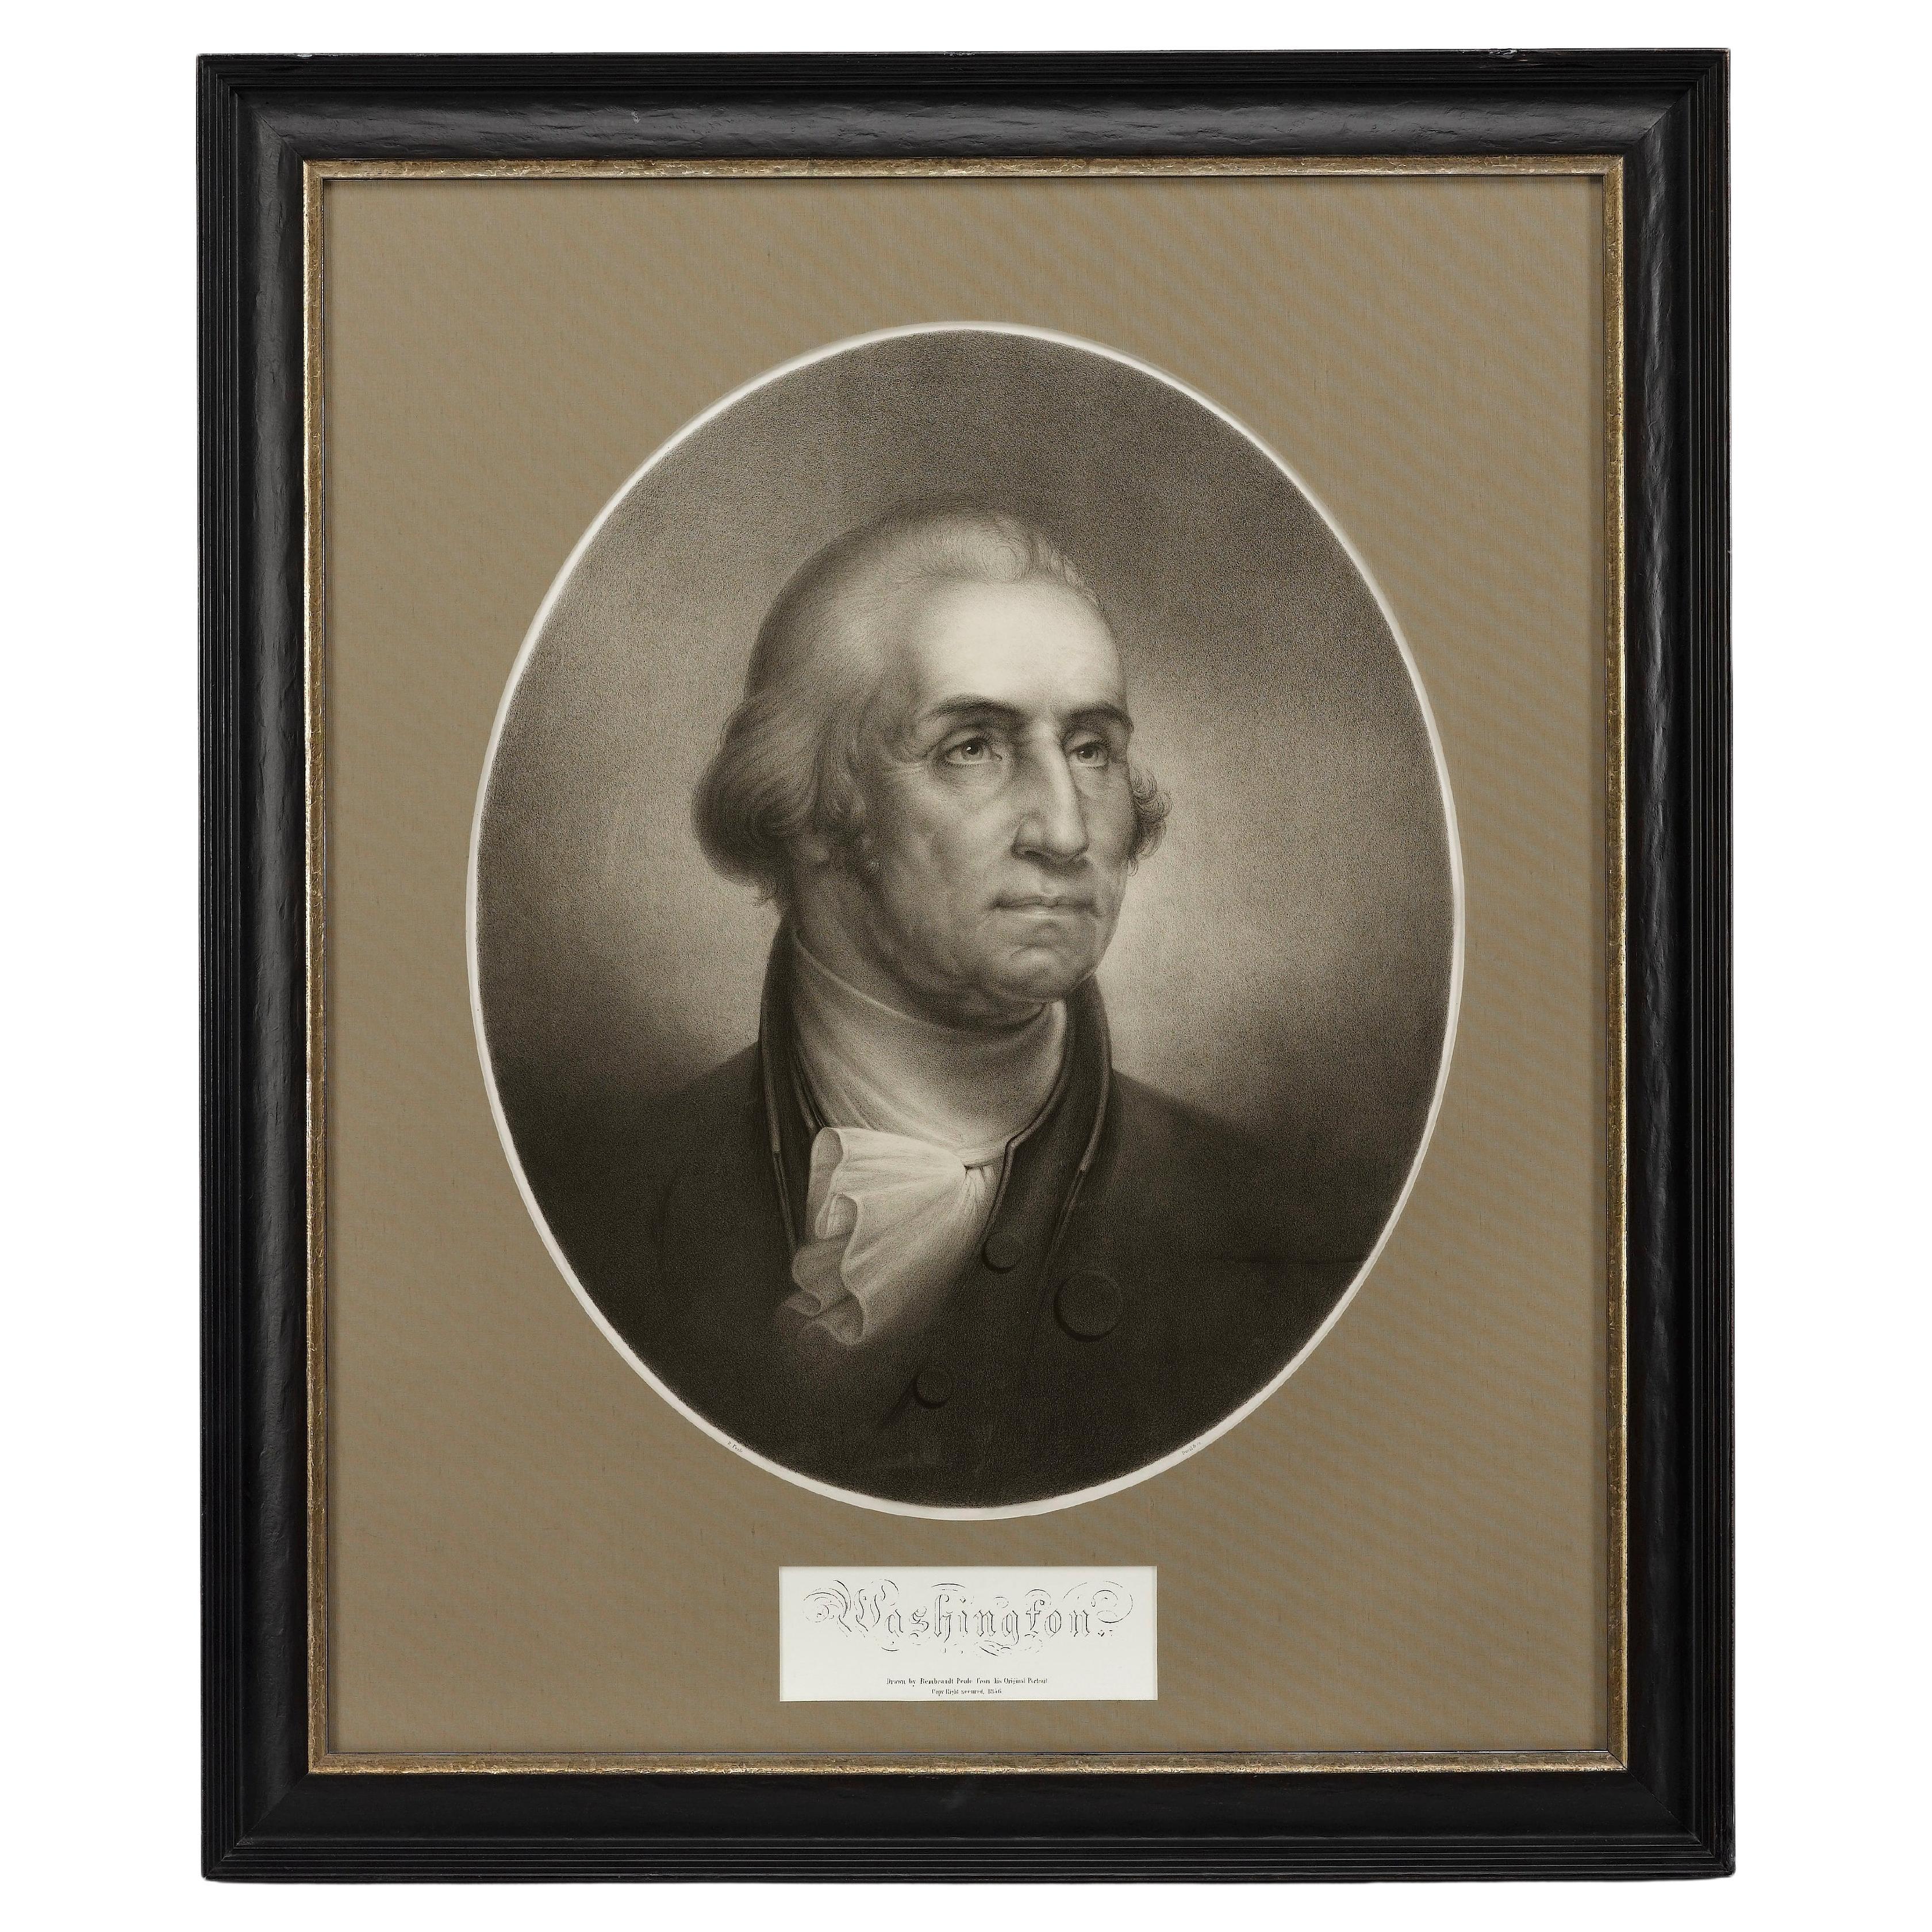 George Washington after the Painting by Rembrandt Peale, circa 1856